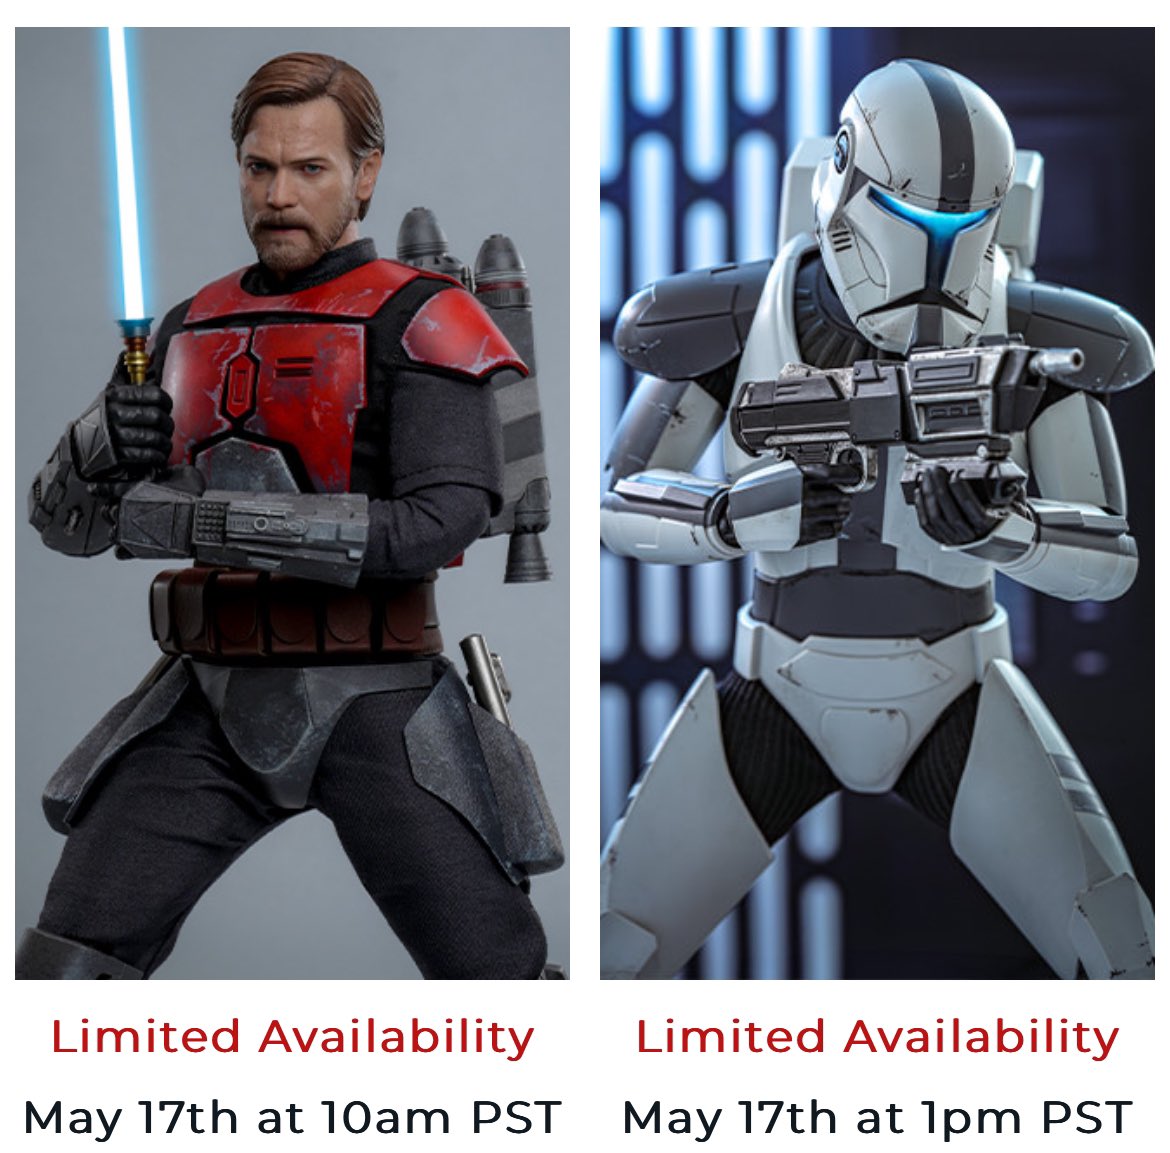 Hot Toys Obi-Wan Kenobi (Mandalorian Armor) and Imperial Commando preorders open tomorrow at Sideshow Collectibles at the times listed. #hottoys #starwars #thebadbatch #theclonewars #starwars #sixthscale #sixthscalefigure #sideshowcollectibles